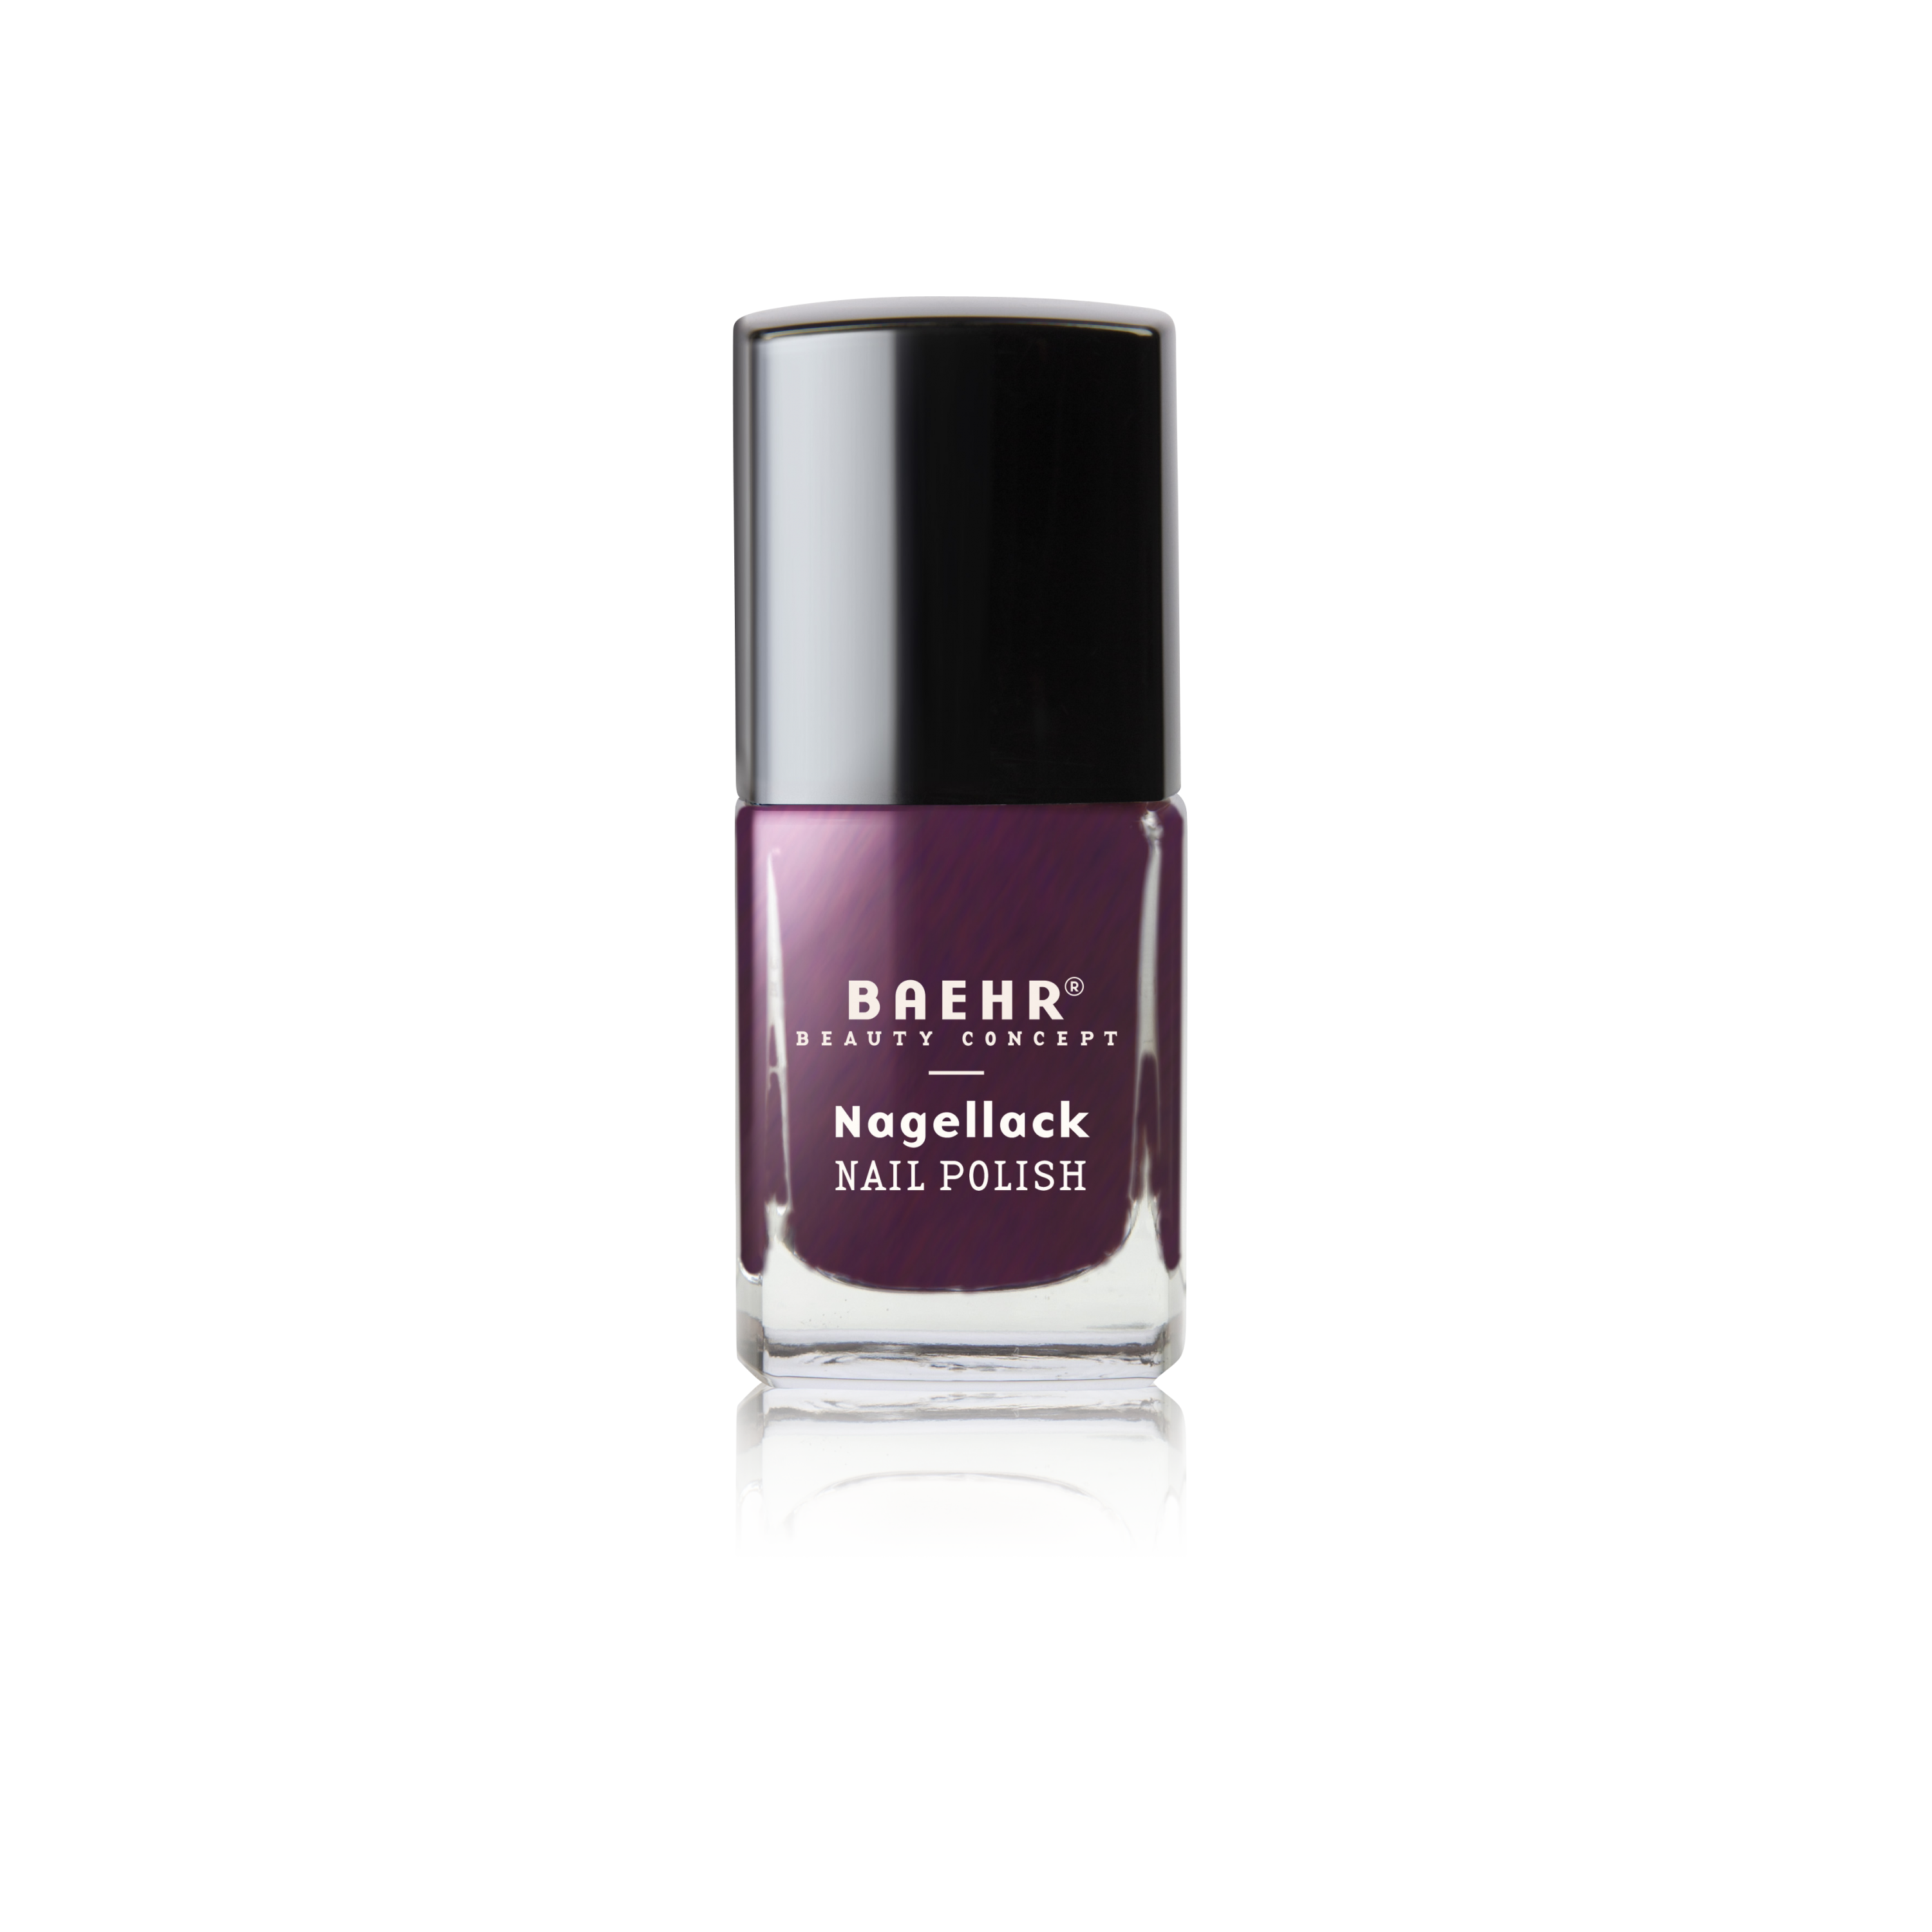 BAEHR BEAUTY CONCEPT - NAILS Nagellack fire and ice 11 ml